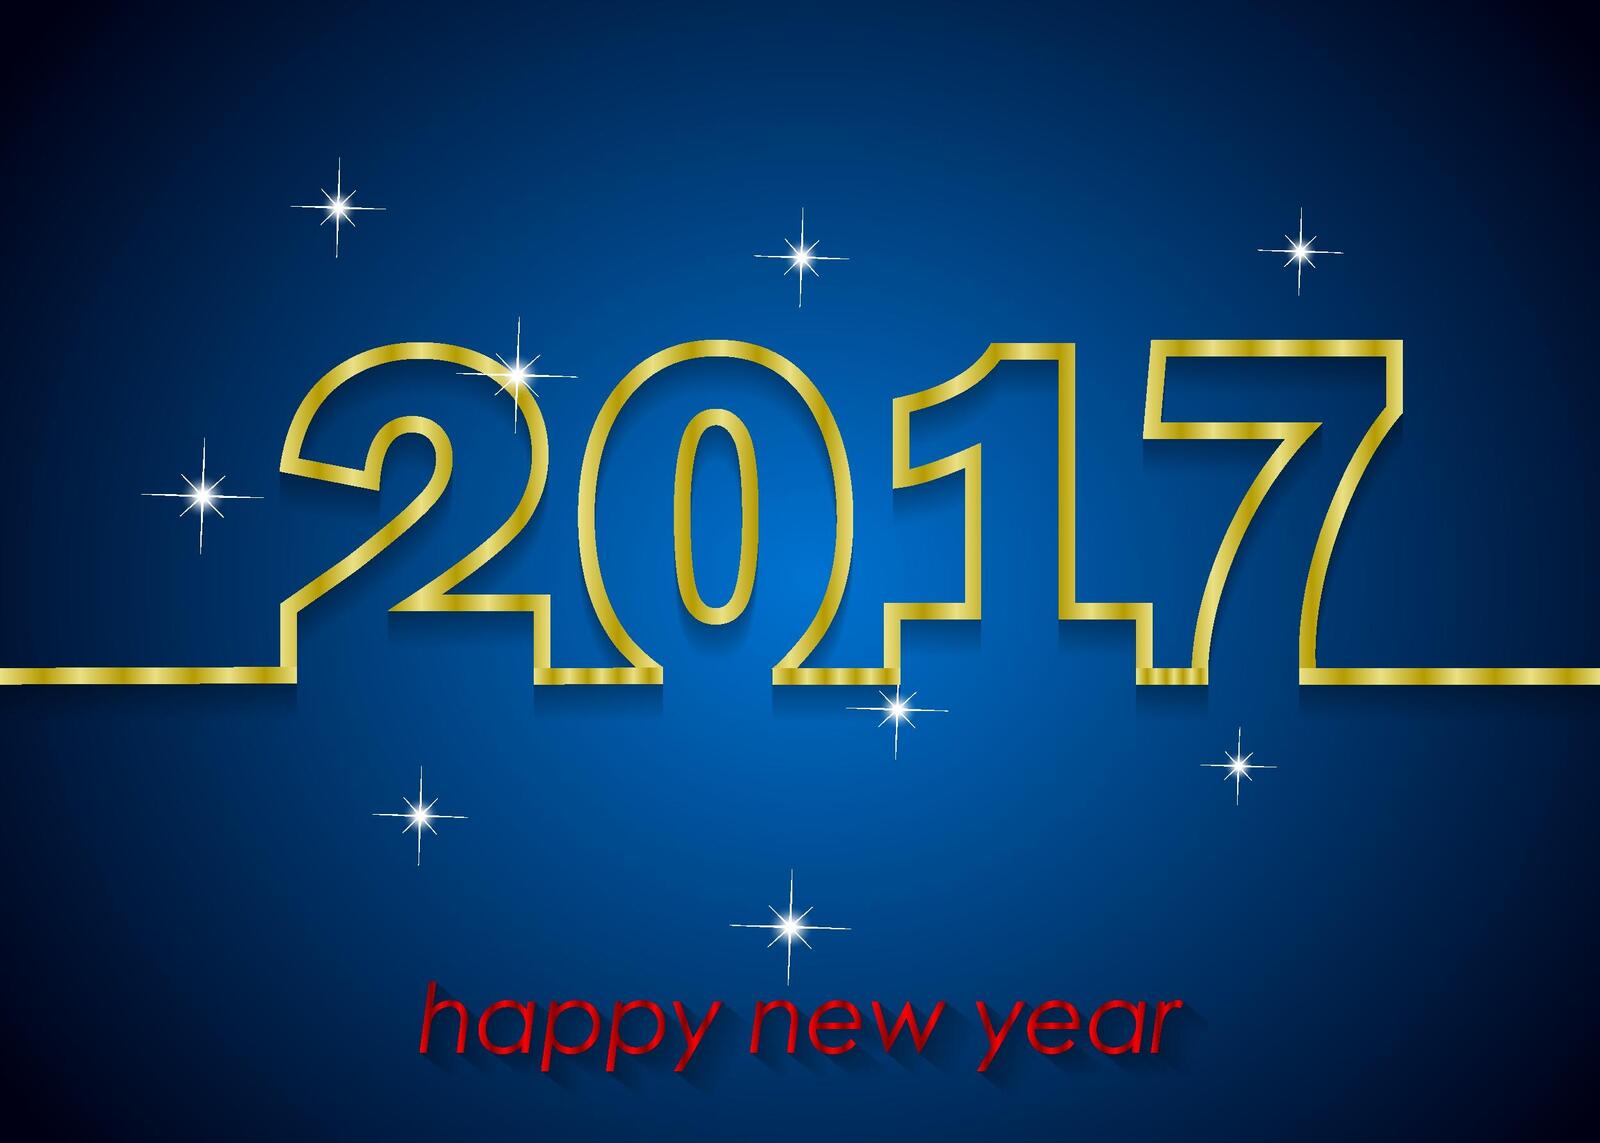 Wallpapers 2017 with new 2017 year date on the desktop